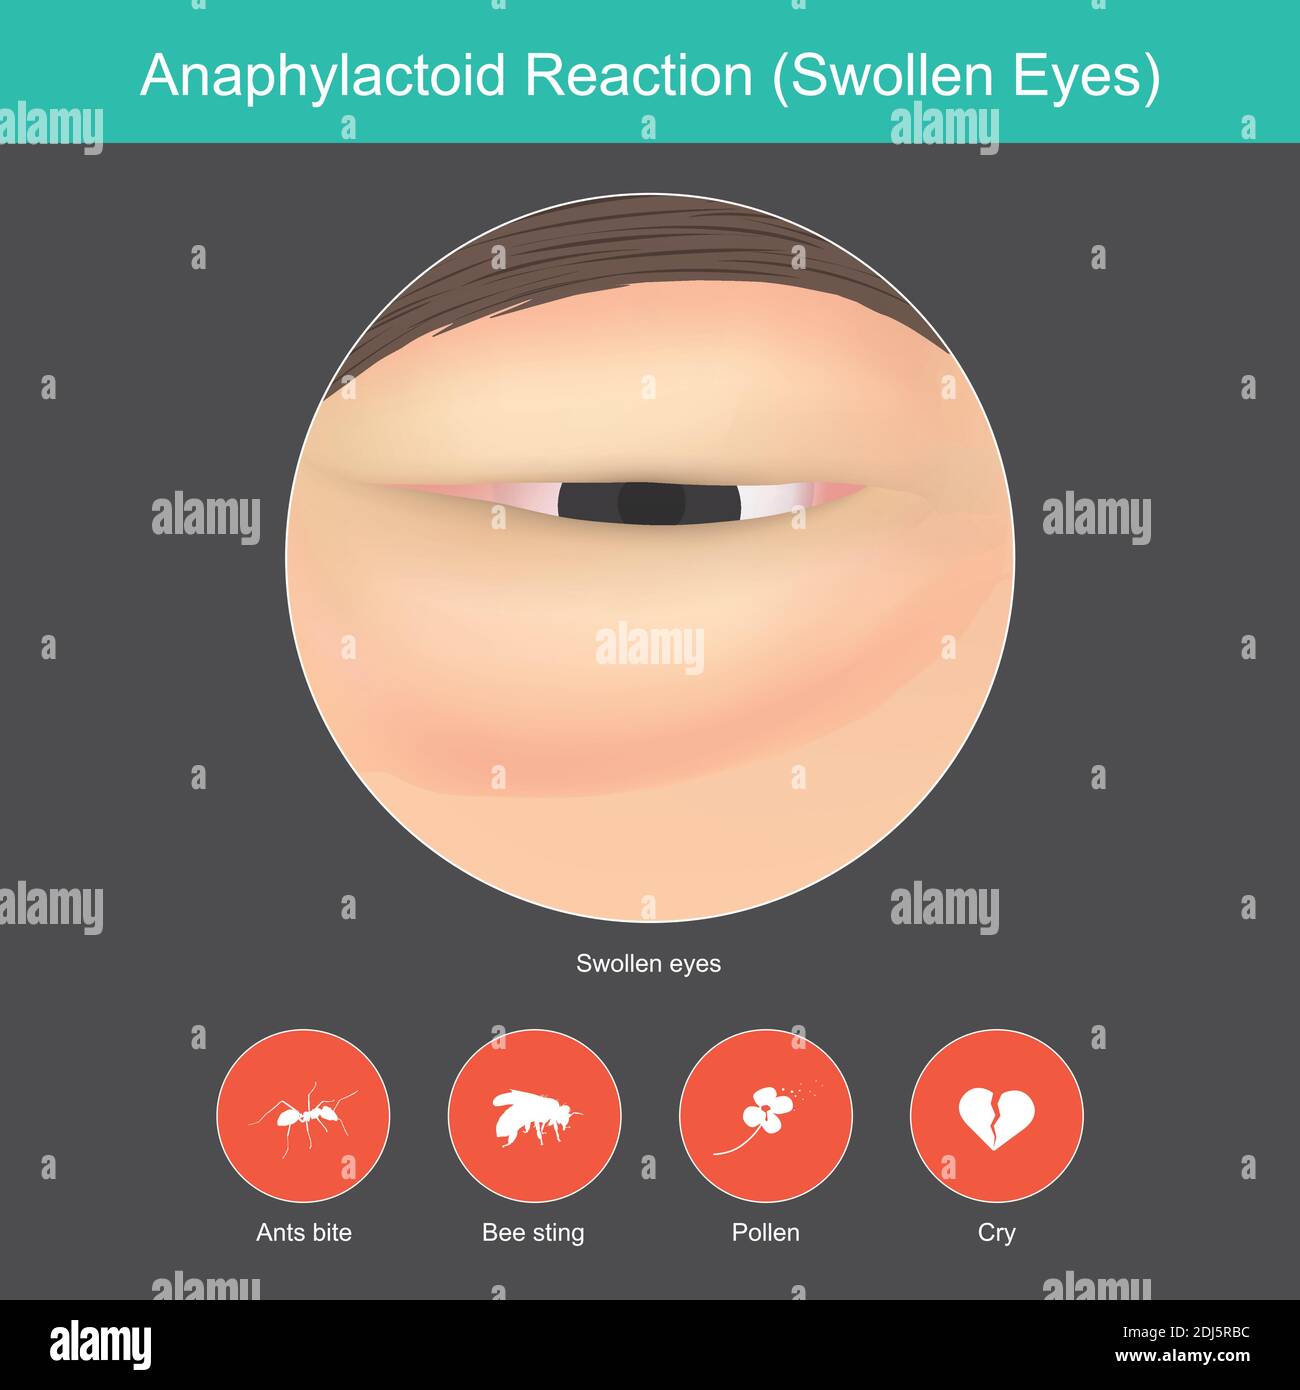 Anaphylactoid Reaction. Illustration show close up around the eye from a symptoms in reaction the immune system response. Stock Vector